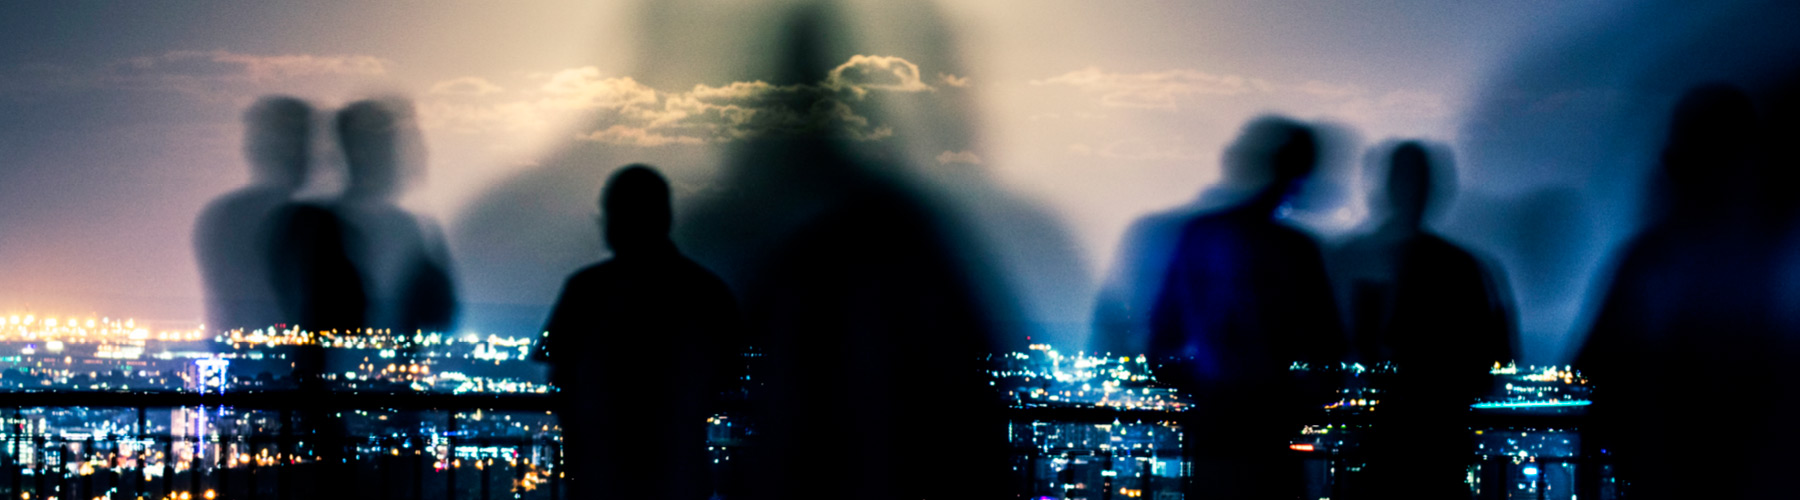 Silhouette of people in the foreground with city lights in the background